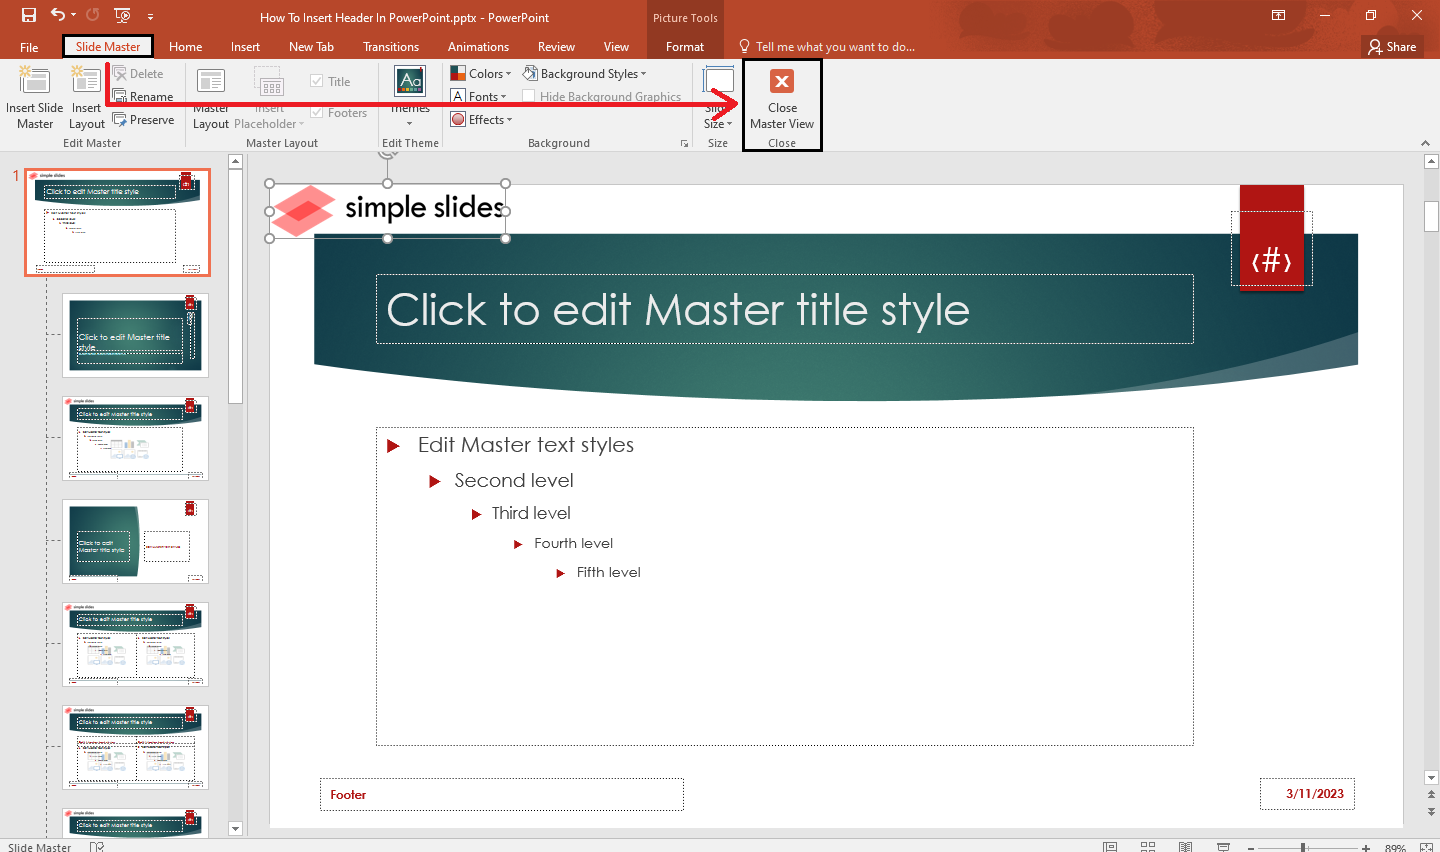 Go back to "Slide Masters" view and select "Close Master View."